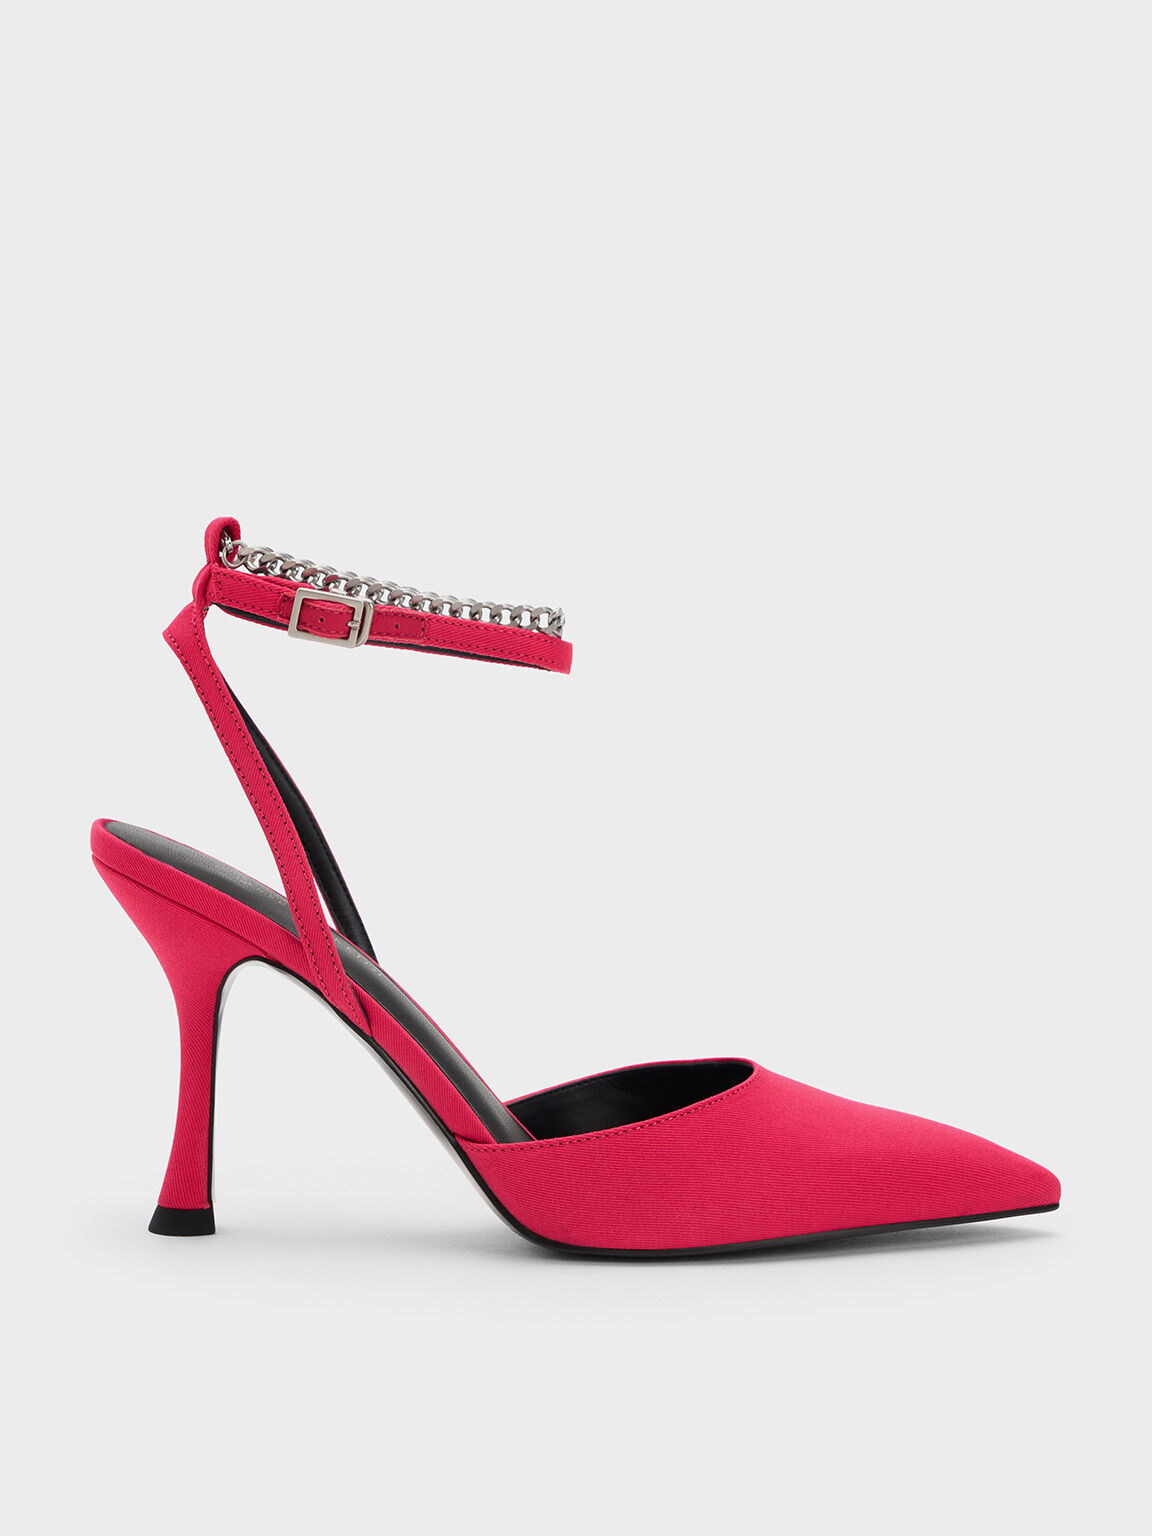 Chain-Link Ankle-Strap Woven Pumps, Fuchsia, hi-res